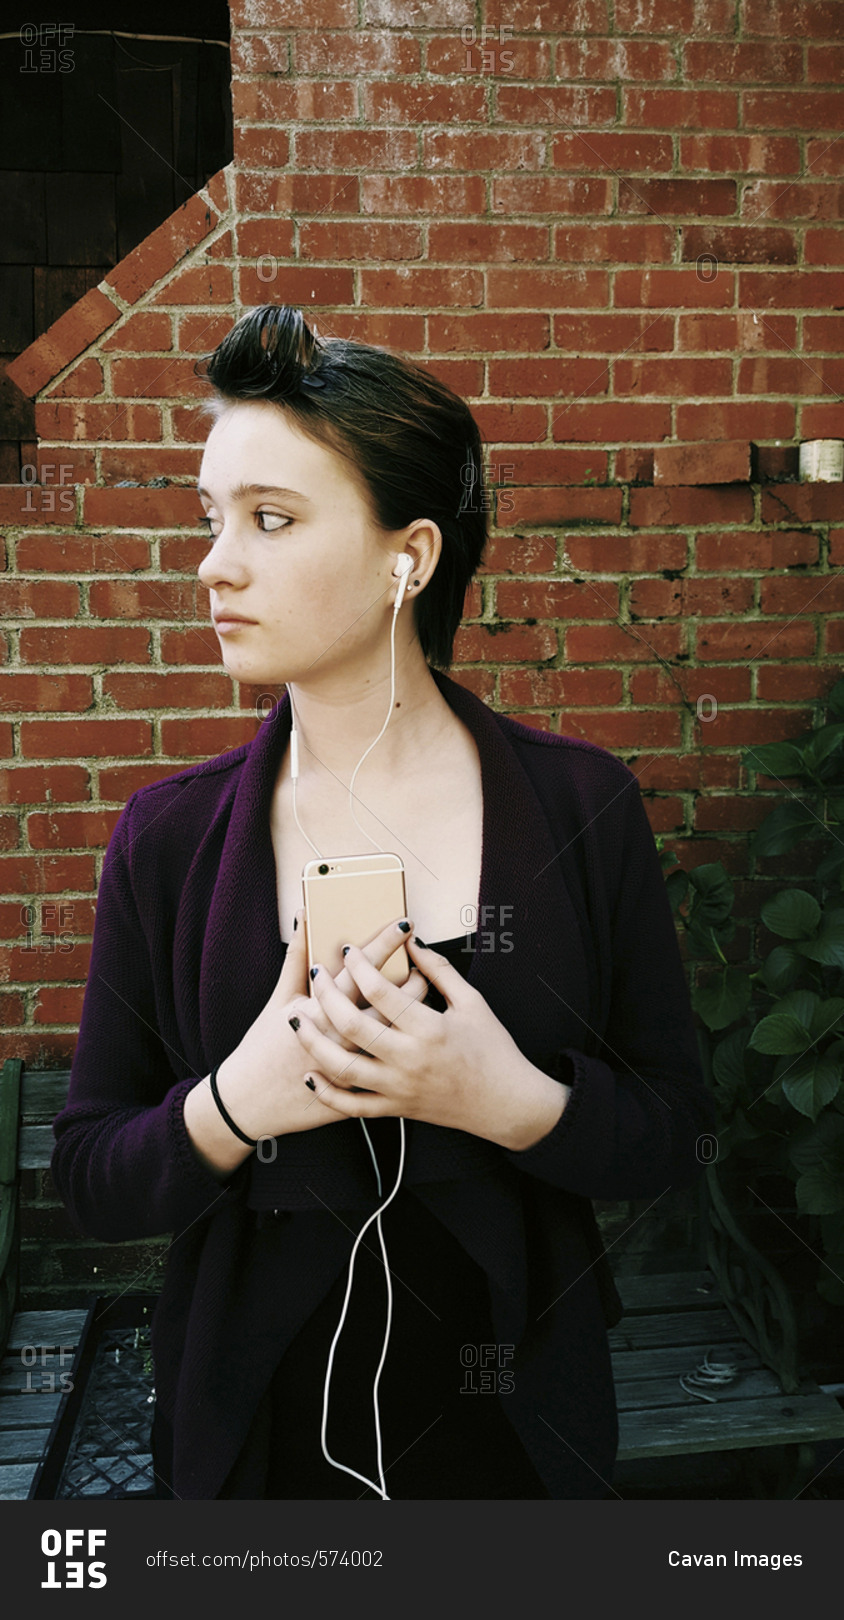 Teenage girl listening music while standing against brick wall in backyard